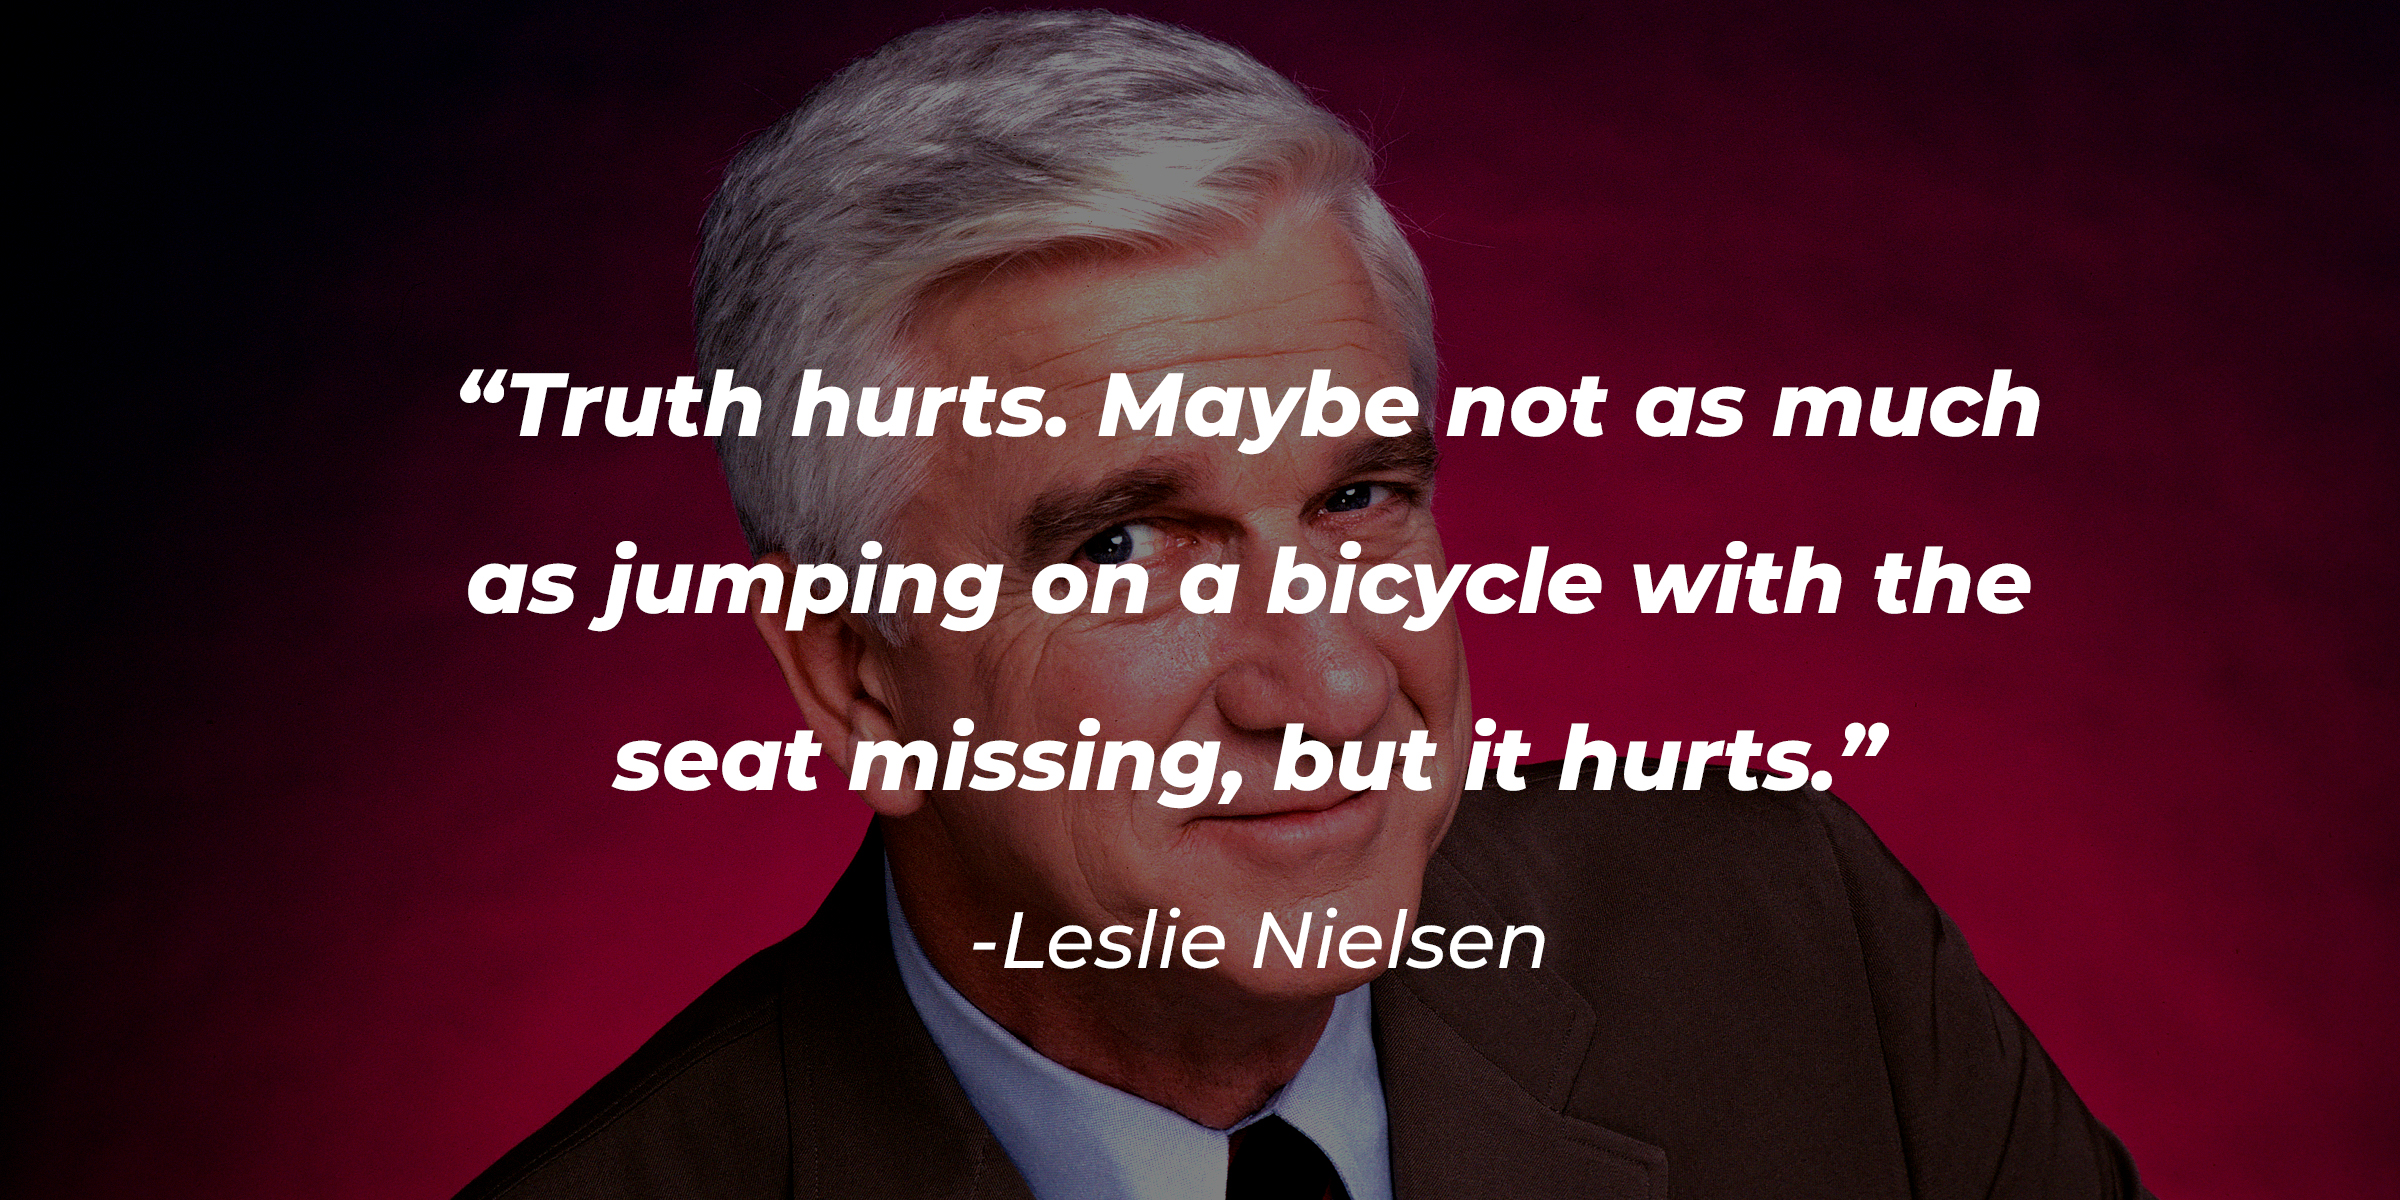 A photo of Leslie Nielsen with Leslie Nielsen's quote: "Truth hurts. Maybe not as much as jumping on a bicycle with the seat missing, but it hurts." | Source: Getty Images